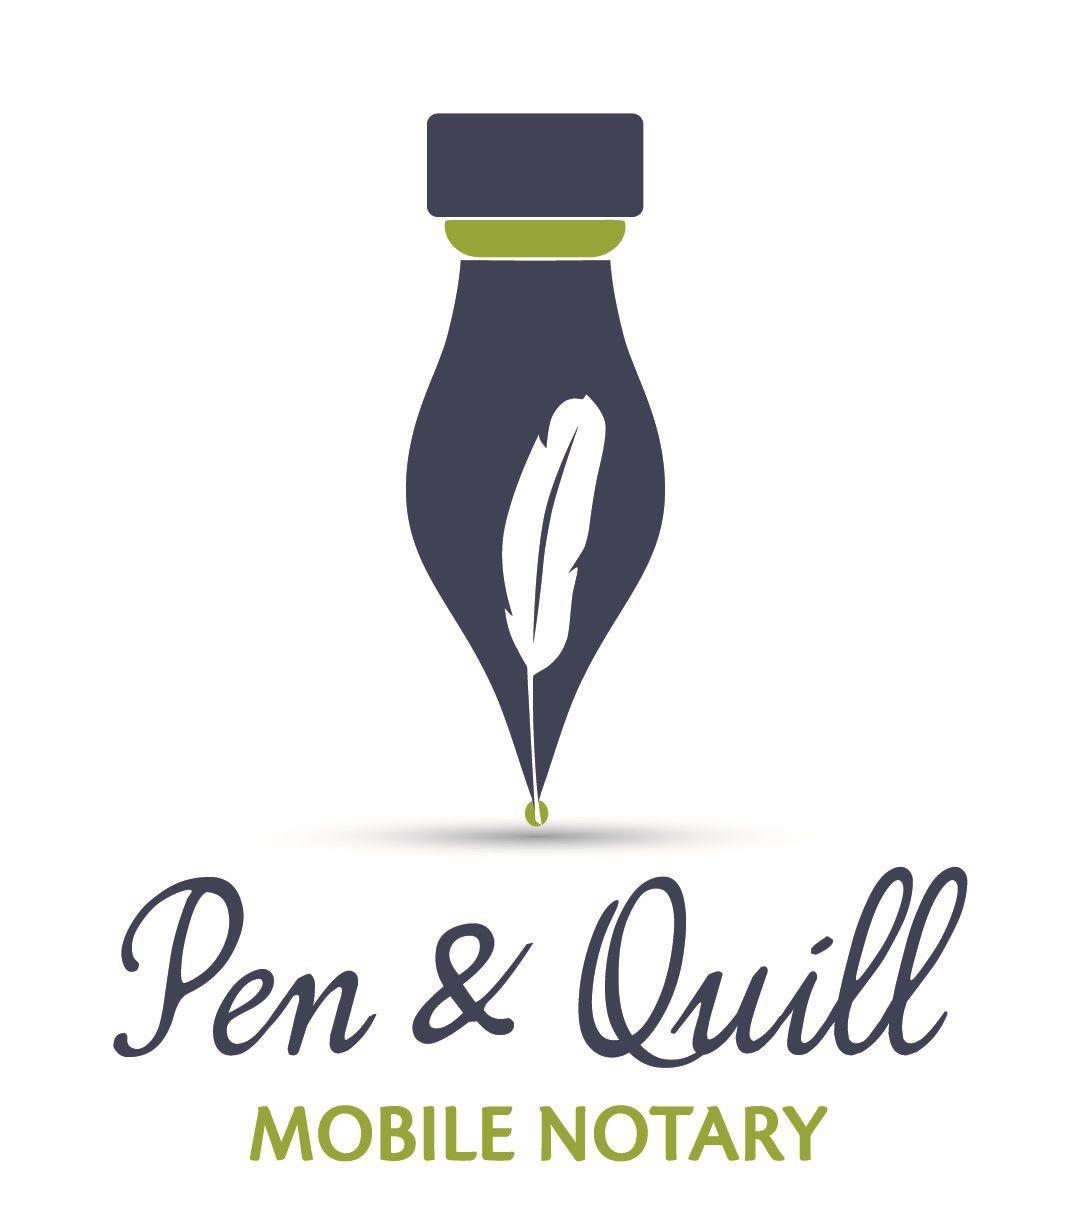 Quill Logo - Pen and Quill Logo Final and Quill Mobile Notary